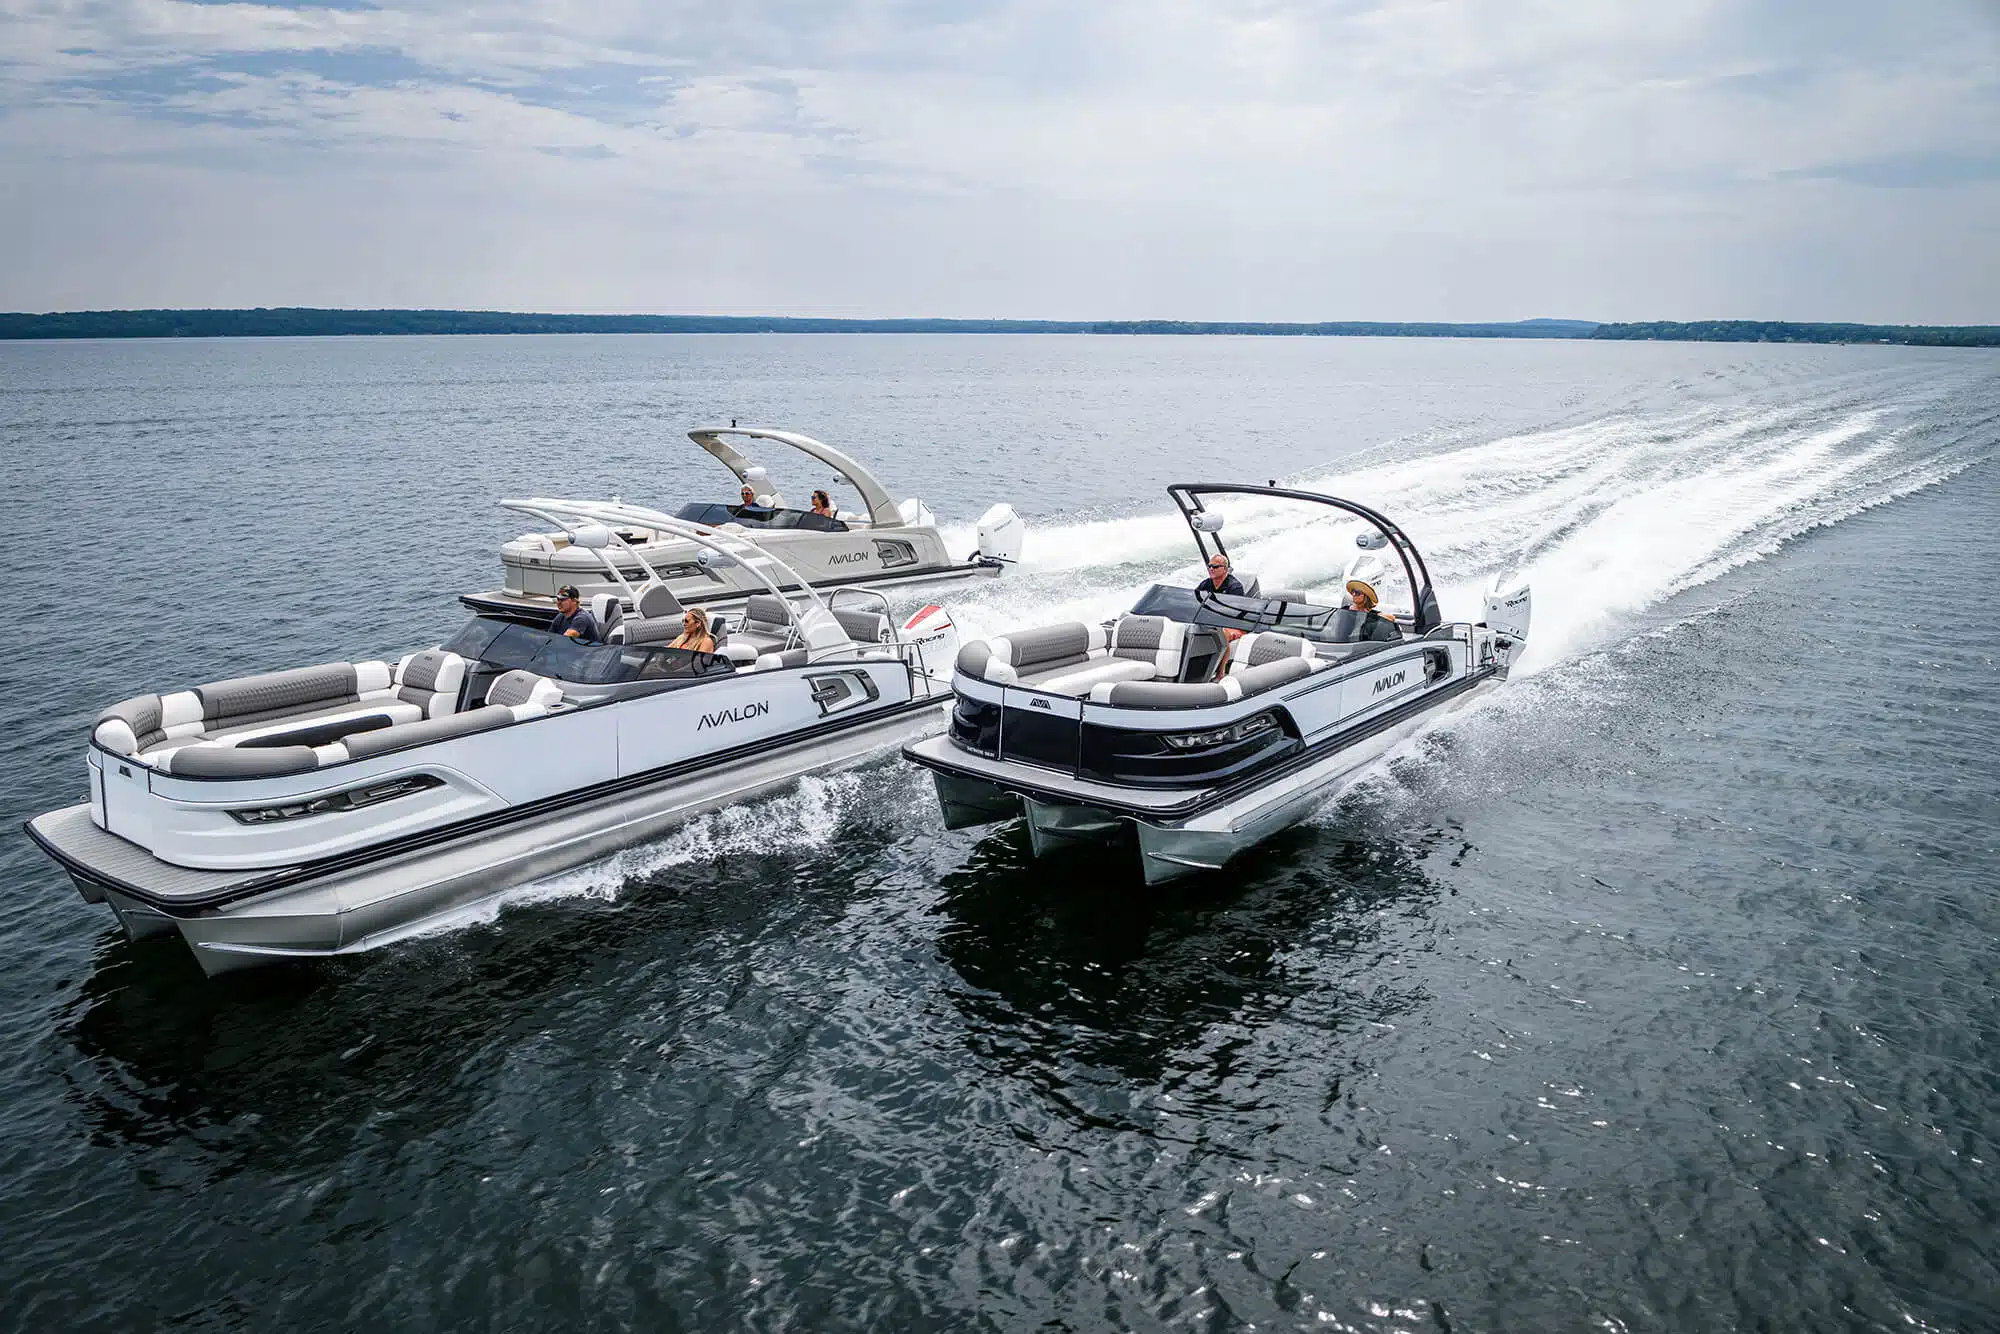 Two luxury pontoon boats, one white and one black, speed side-by-side across a large body of water. Both pontoons near me carry passengers, and one has an extended canopy. The sky is partly cloudy, and the distant shoreline is faintly visible.